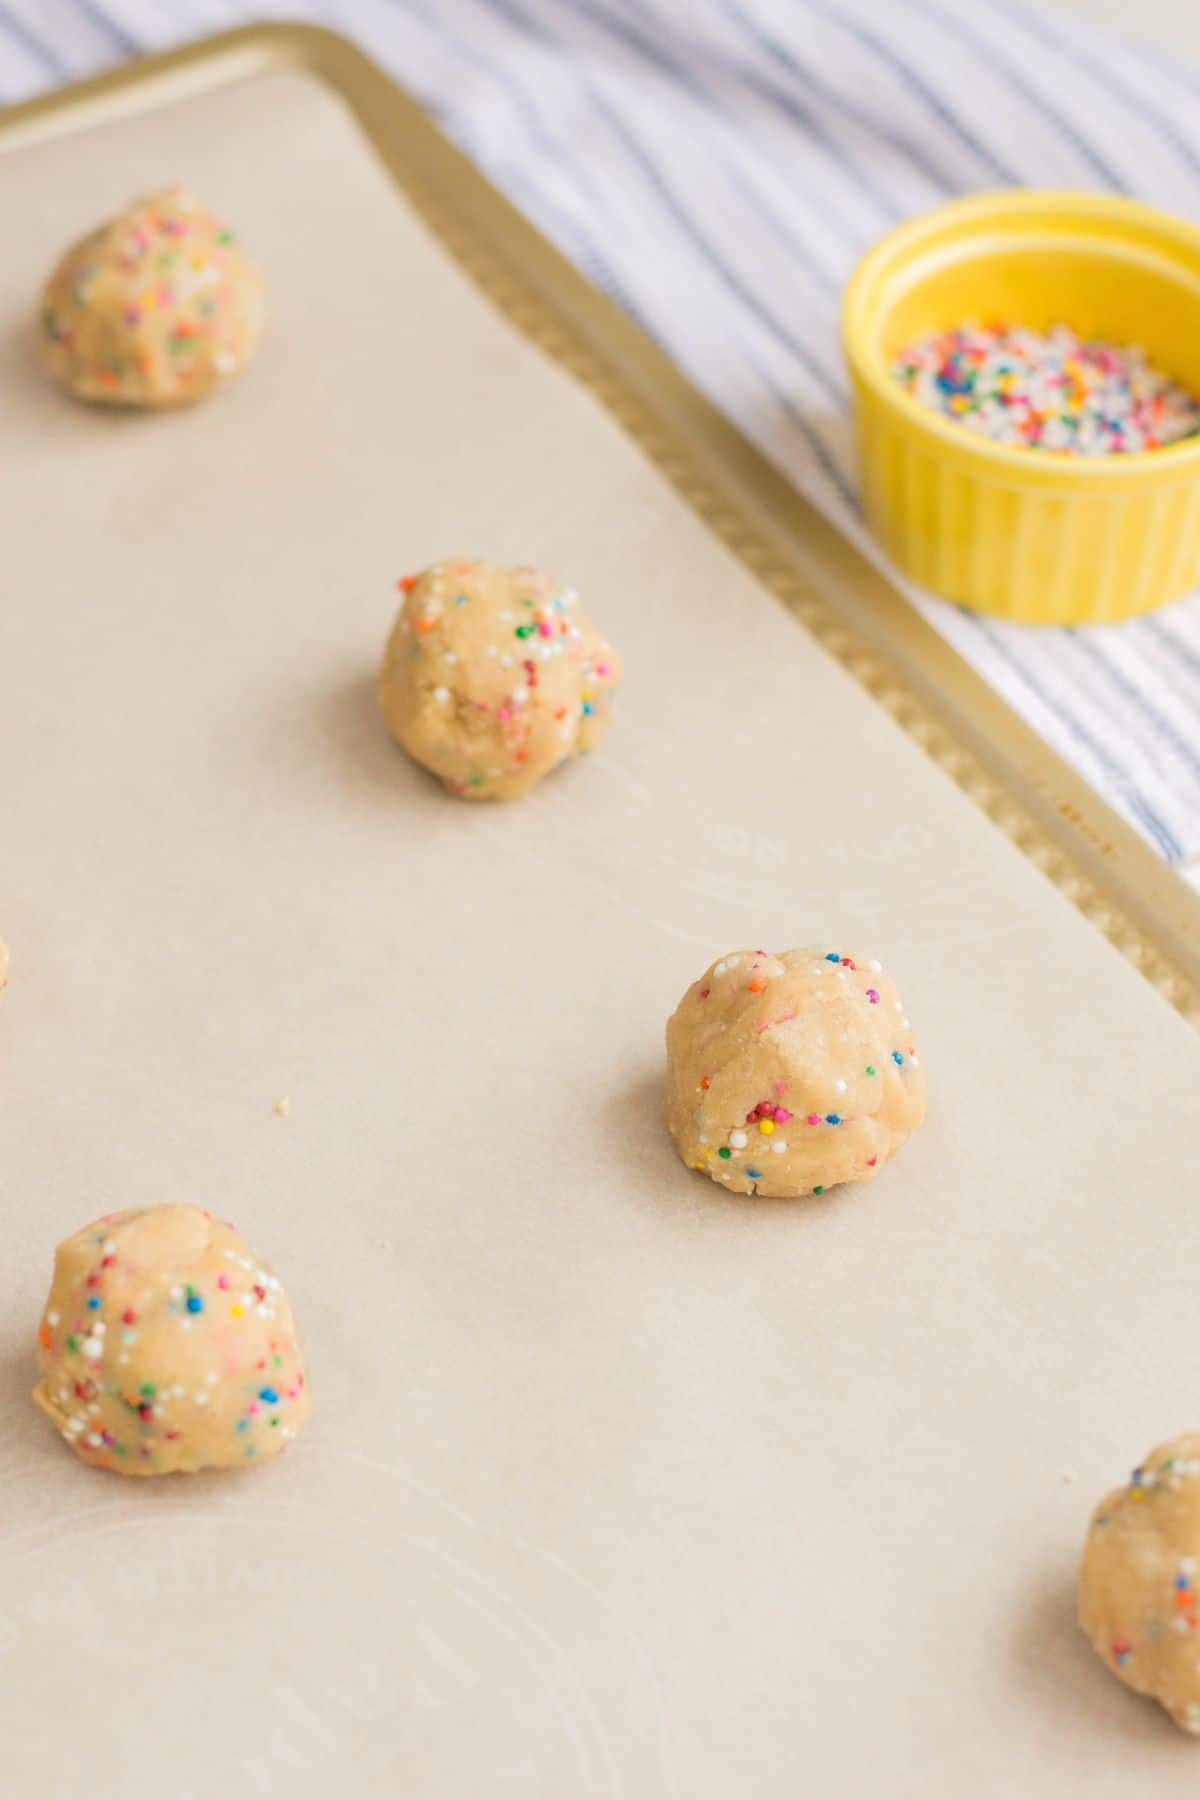 Funfetti cookie ready to be baked.